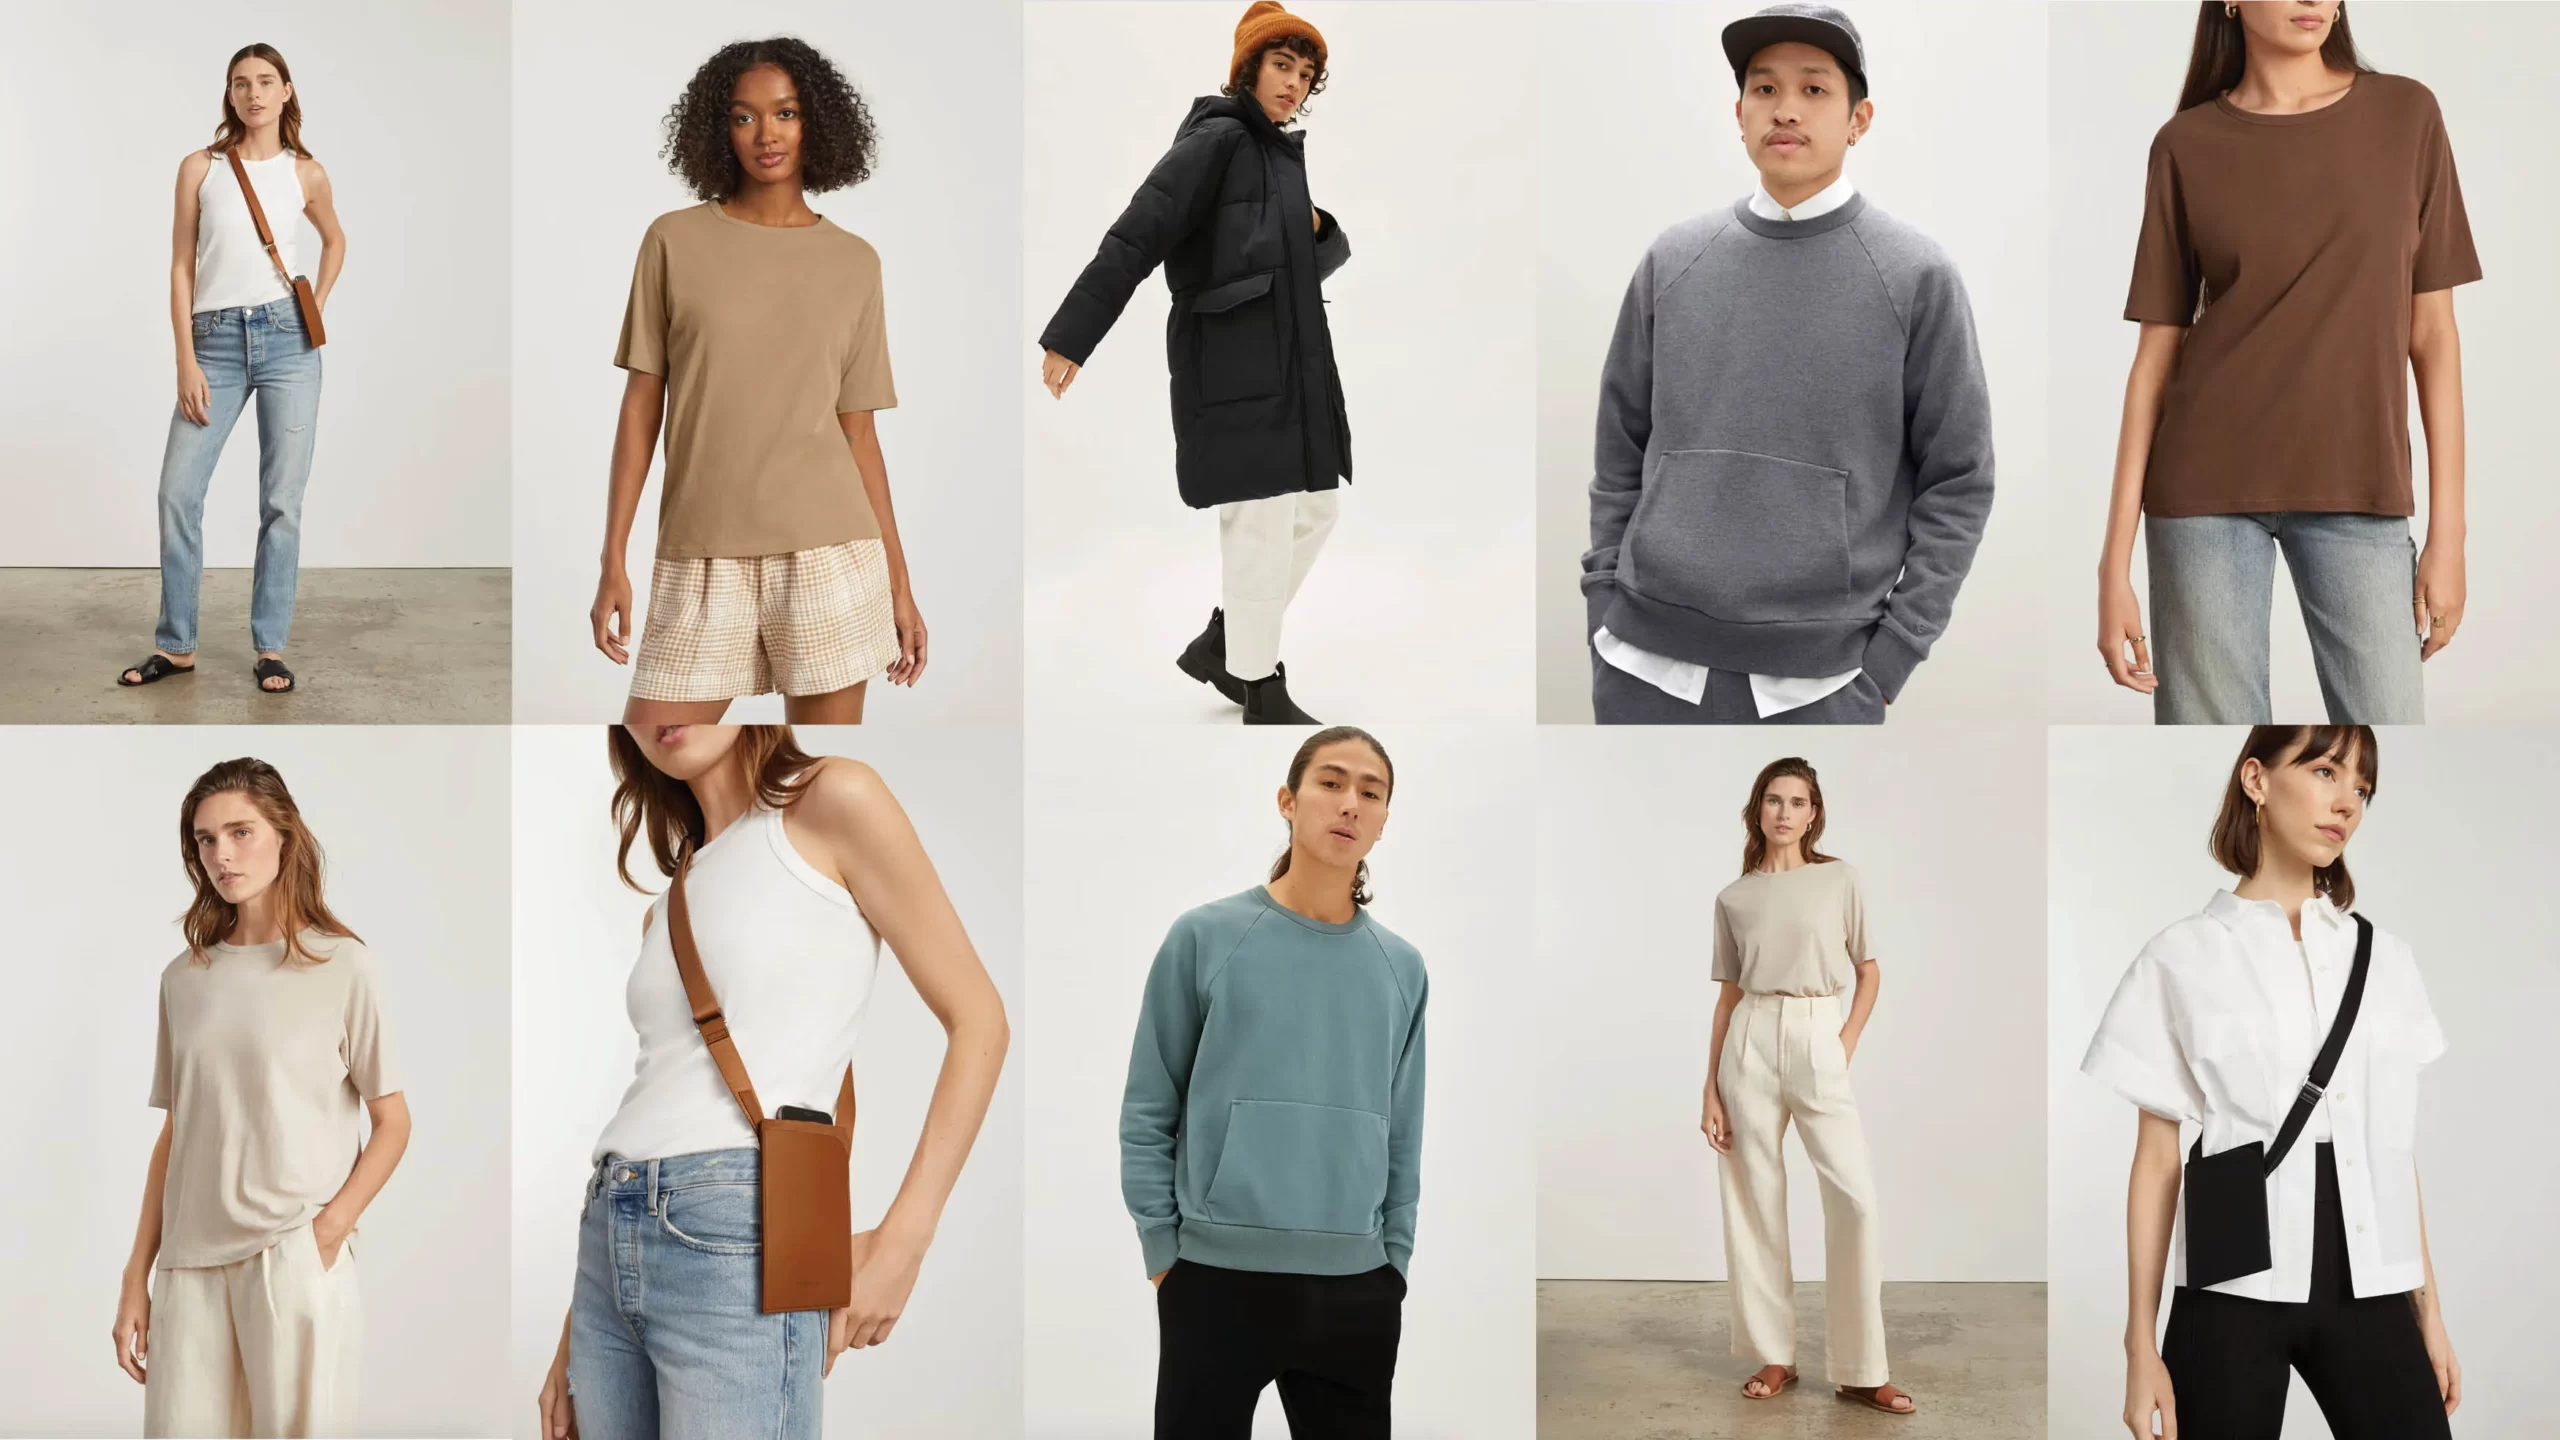 Different men and women wearing various clothing items from Everlane clothing.